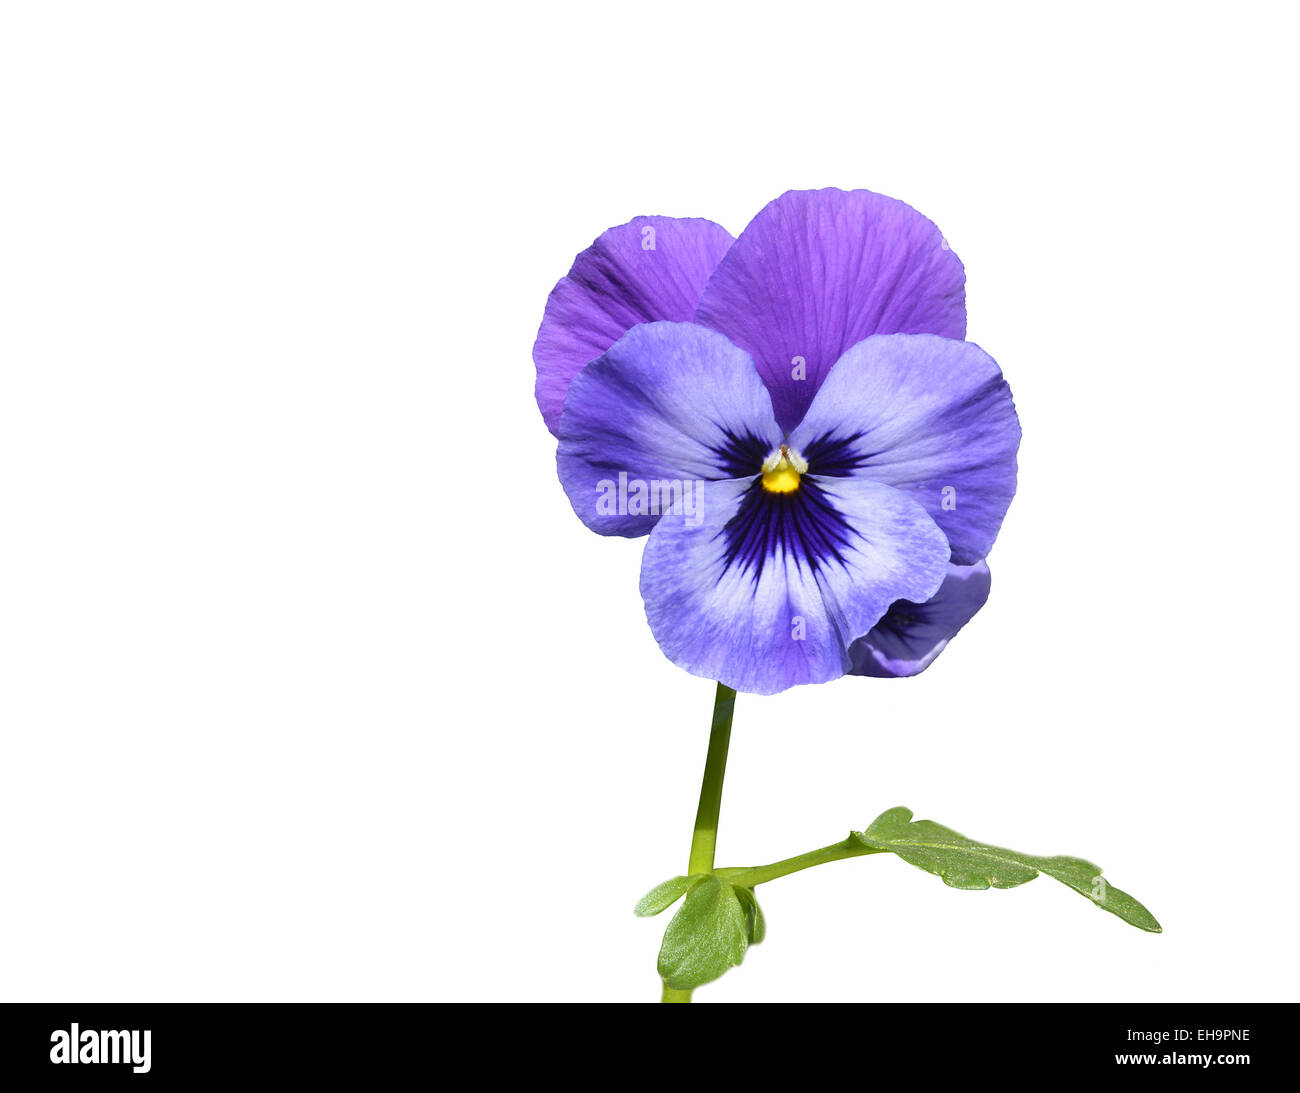 Purple pansy flower with leaf closeup isolated on white. Stock Photo